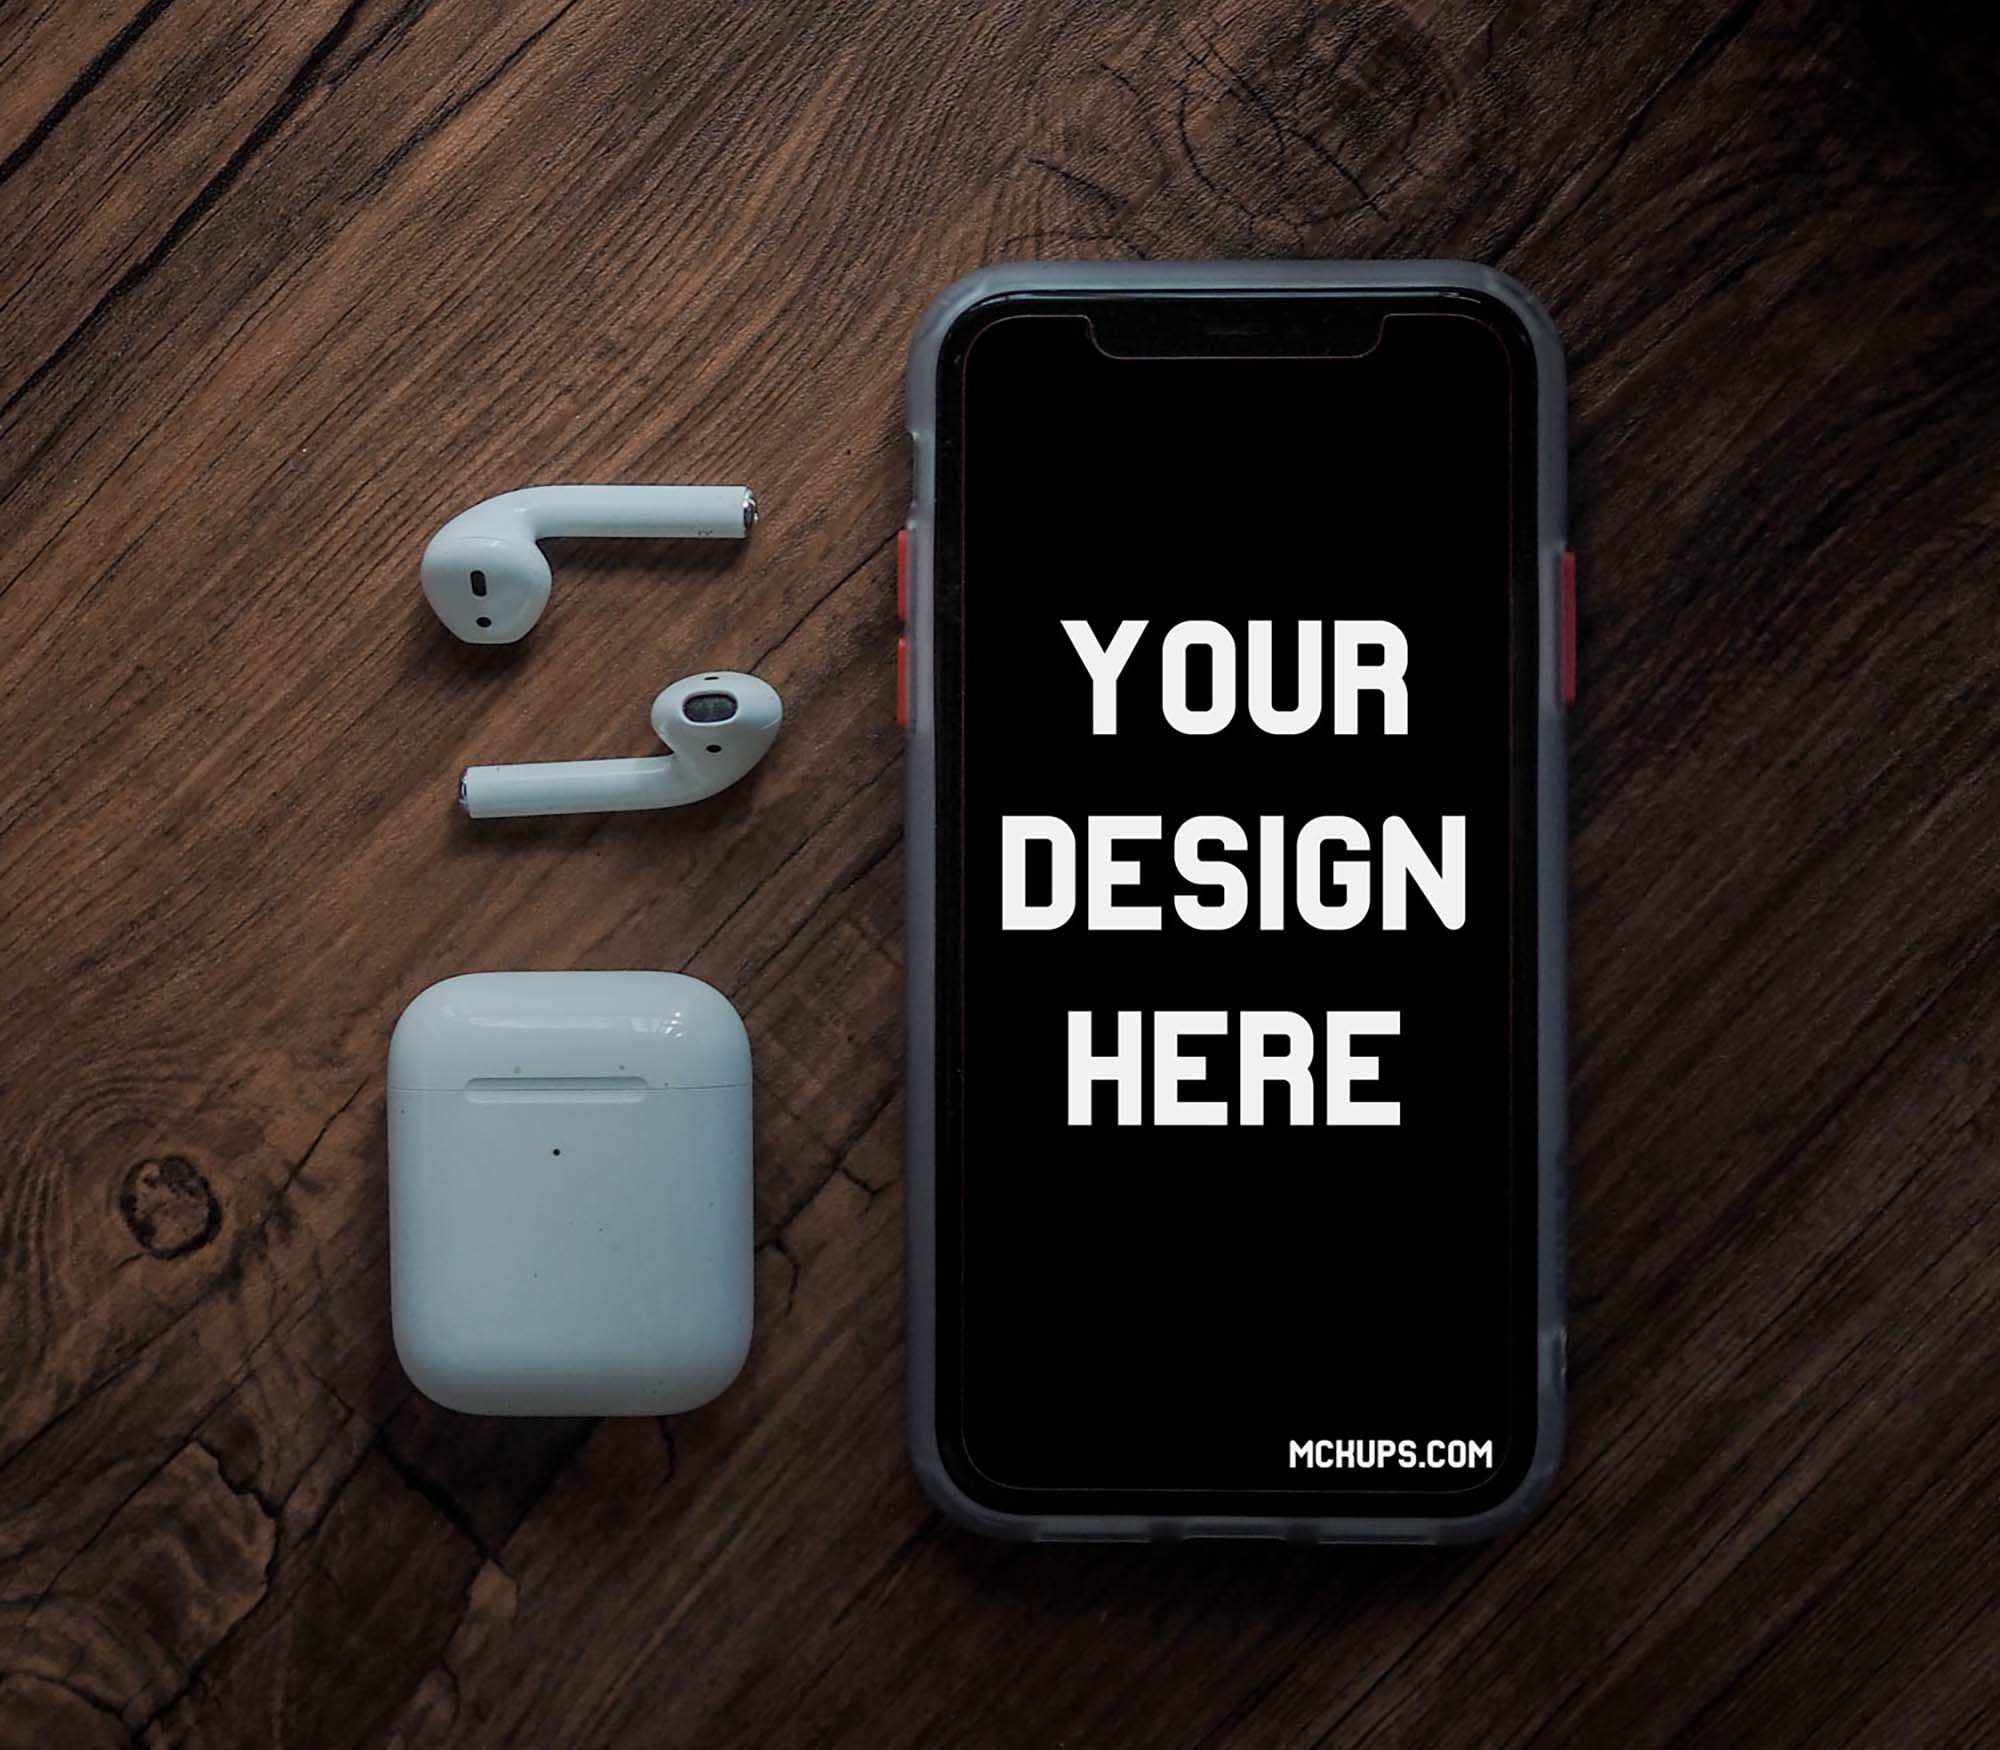 iPhone and AirPods Mockup